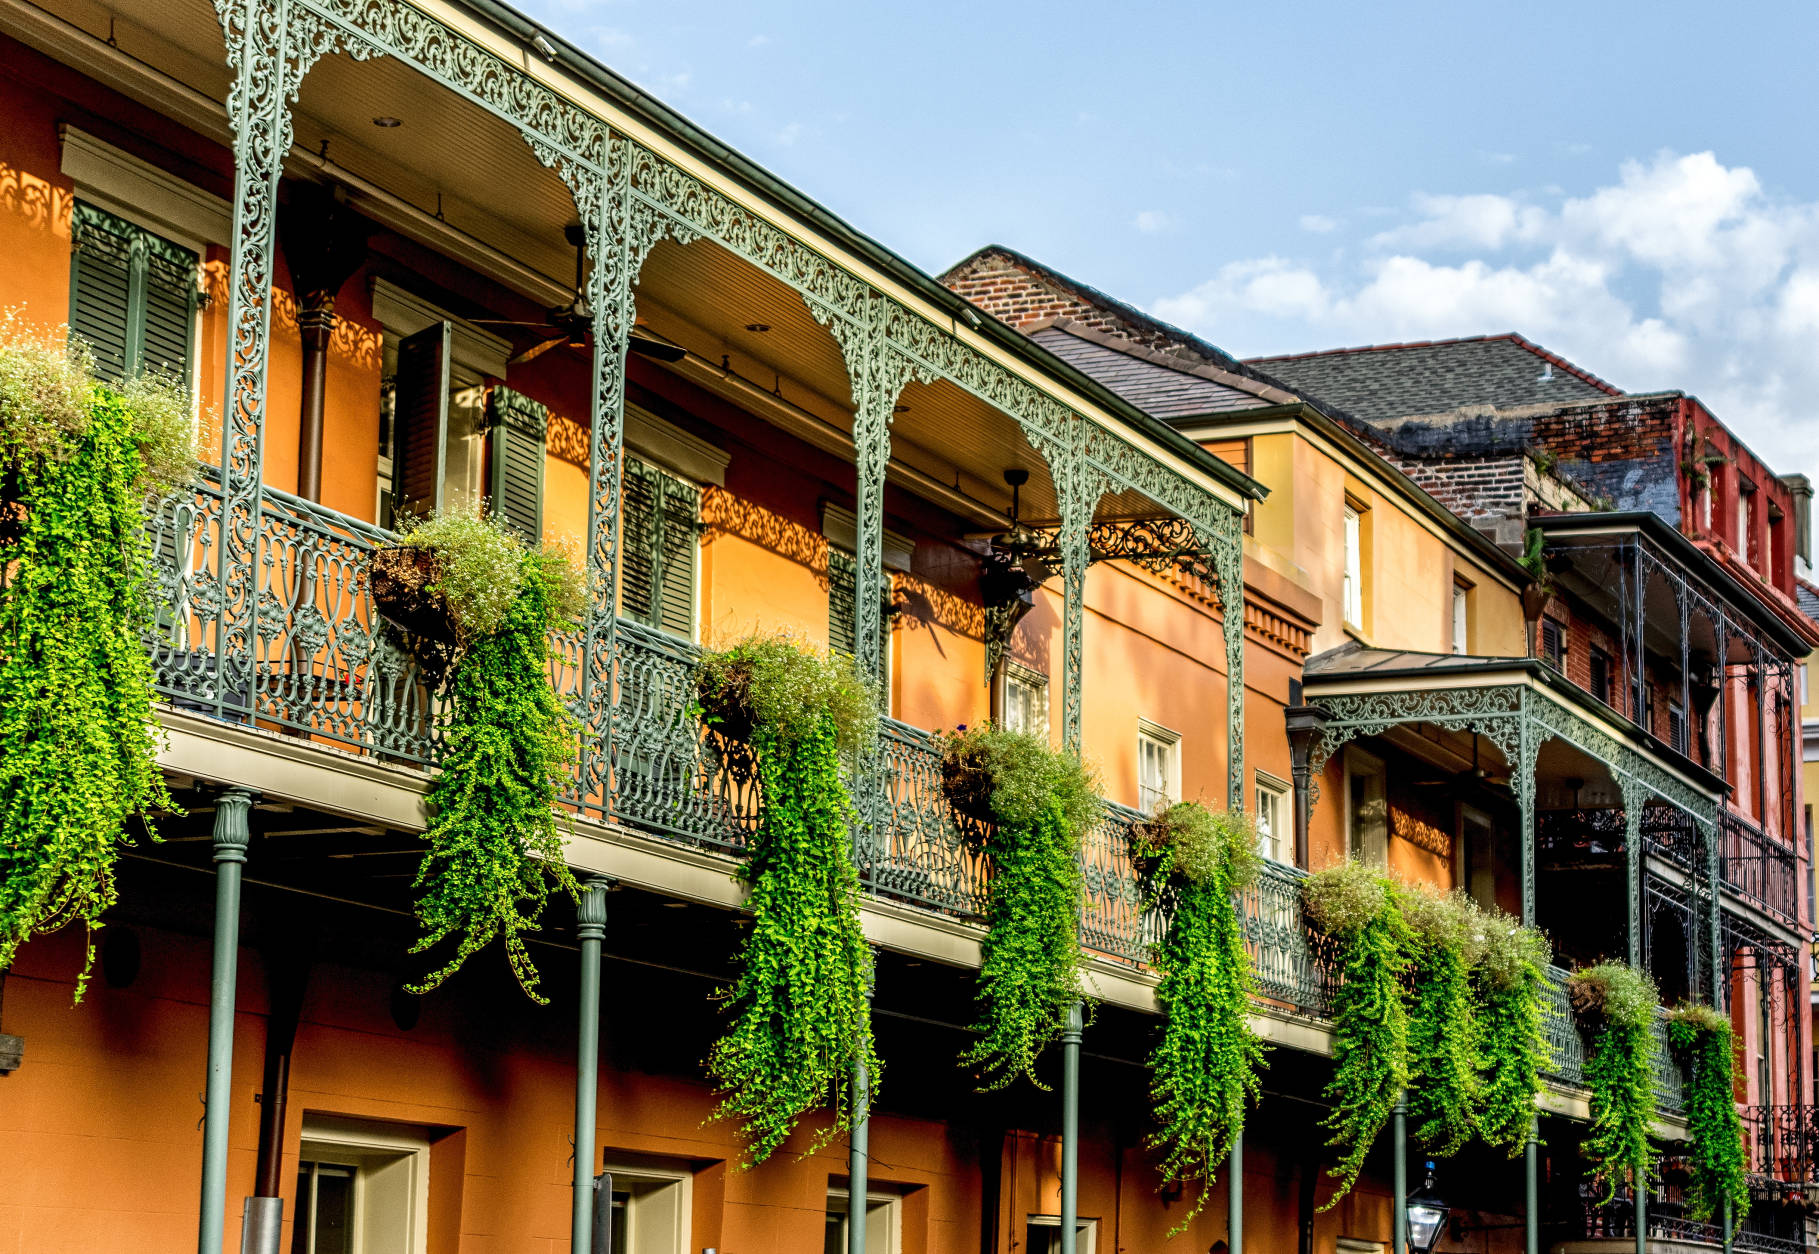 5. New Orleans, Louisiana

The Big Easy lands at No. 5 in Condé Nast Traveler's "The Best Big U.S. Cities." (Getty Images/iStockphoto/GregJK)